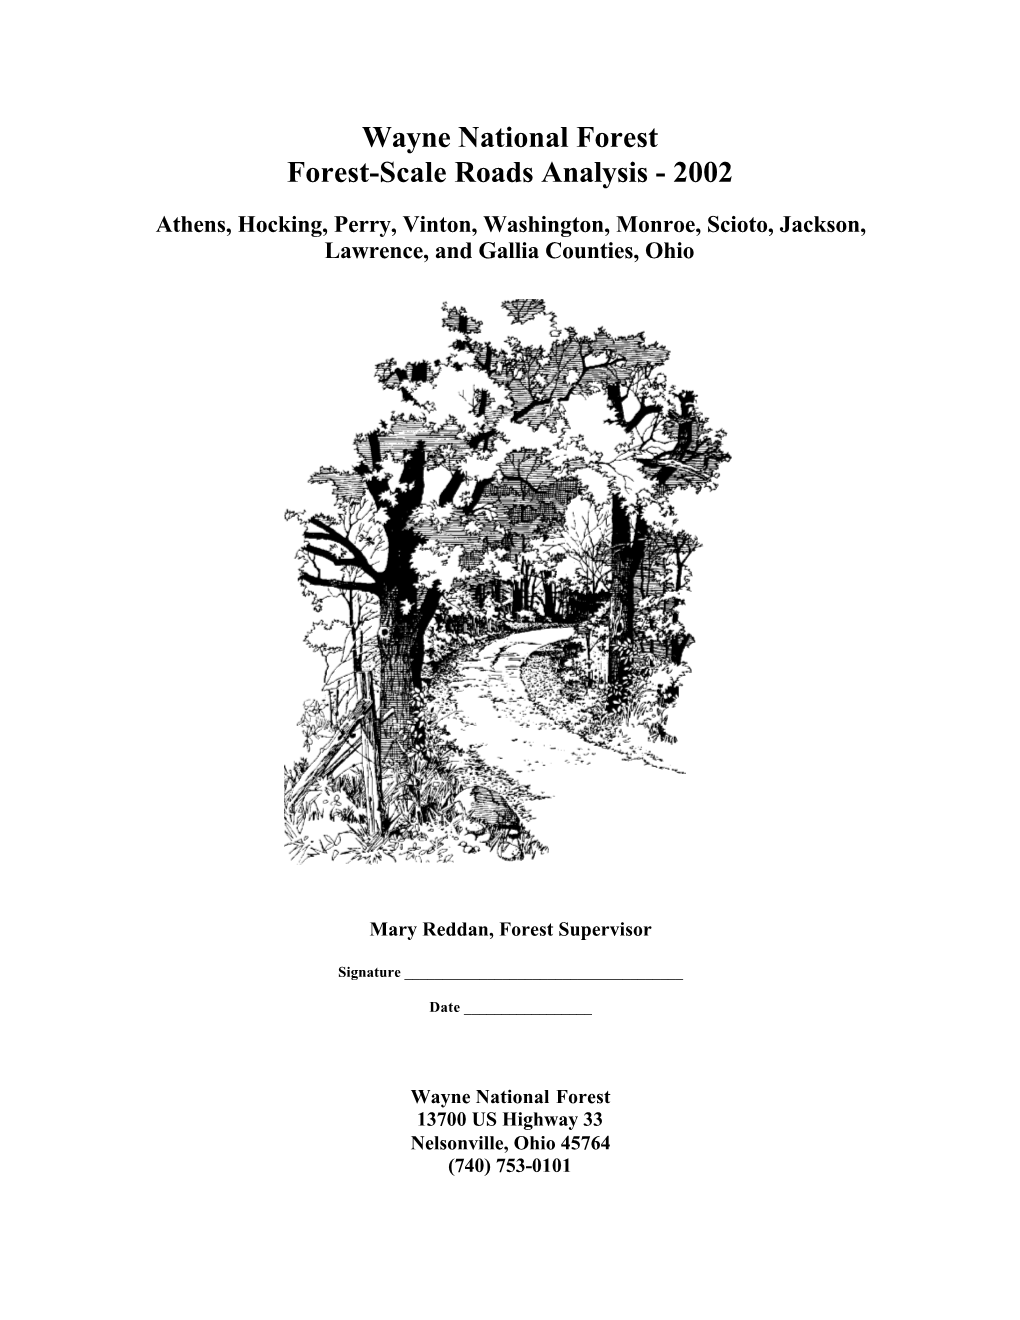 Wayne National Forest Forest-Scale Roads Analysis - 2002